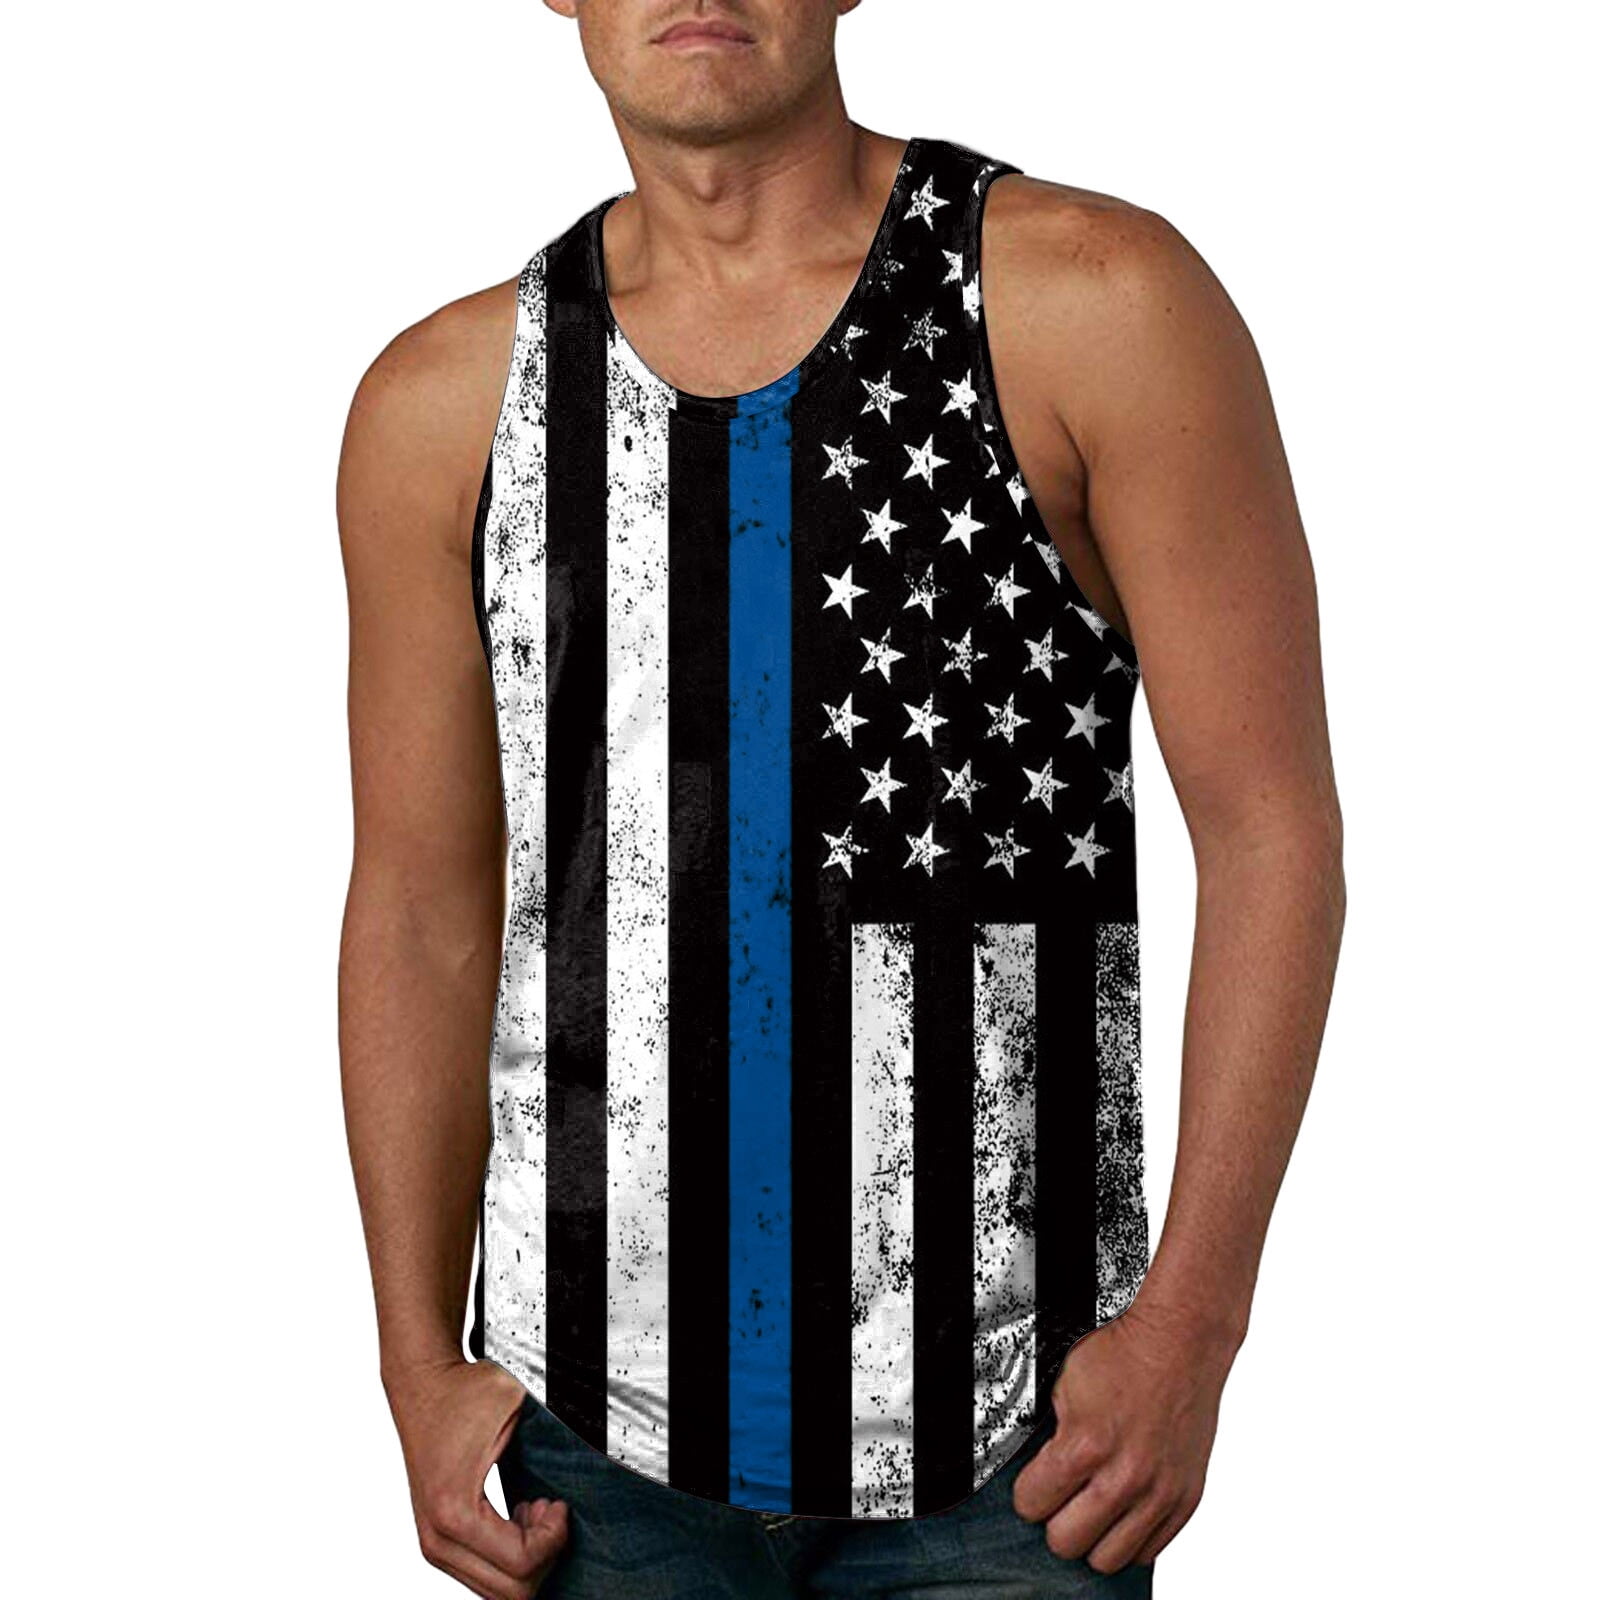 Men's Patriotic American Flag Tank Top Shirt 4Th of July Vintage Classic Patriot USA Stripes and Star Gift Vest 